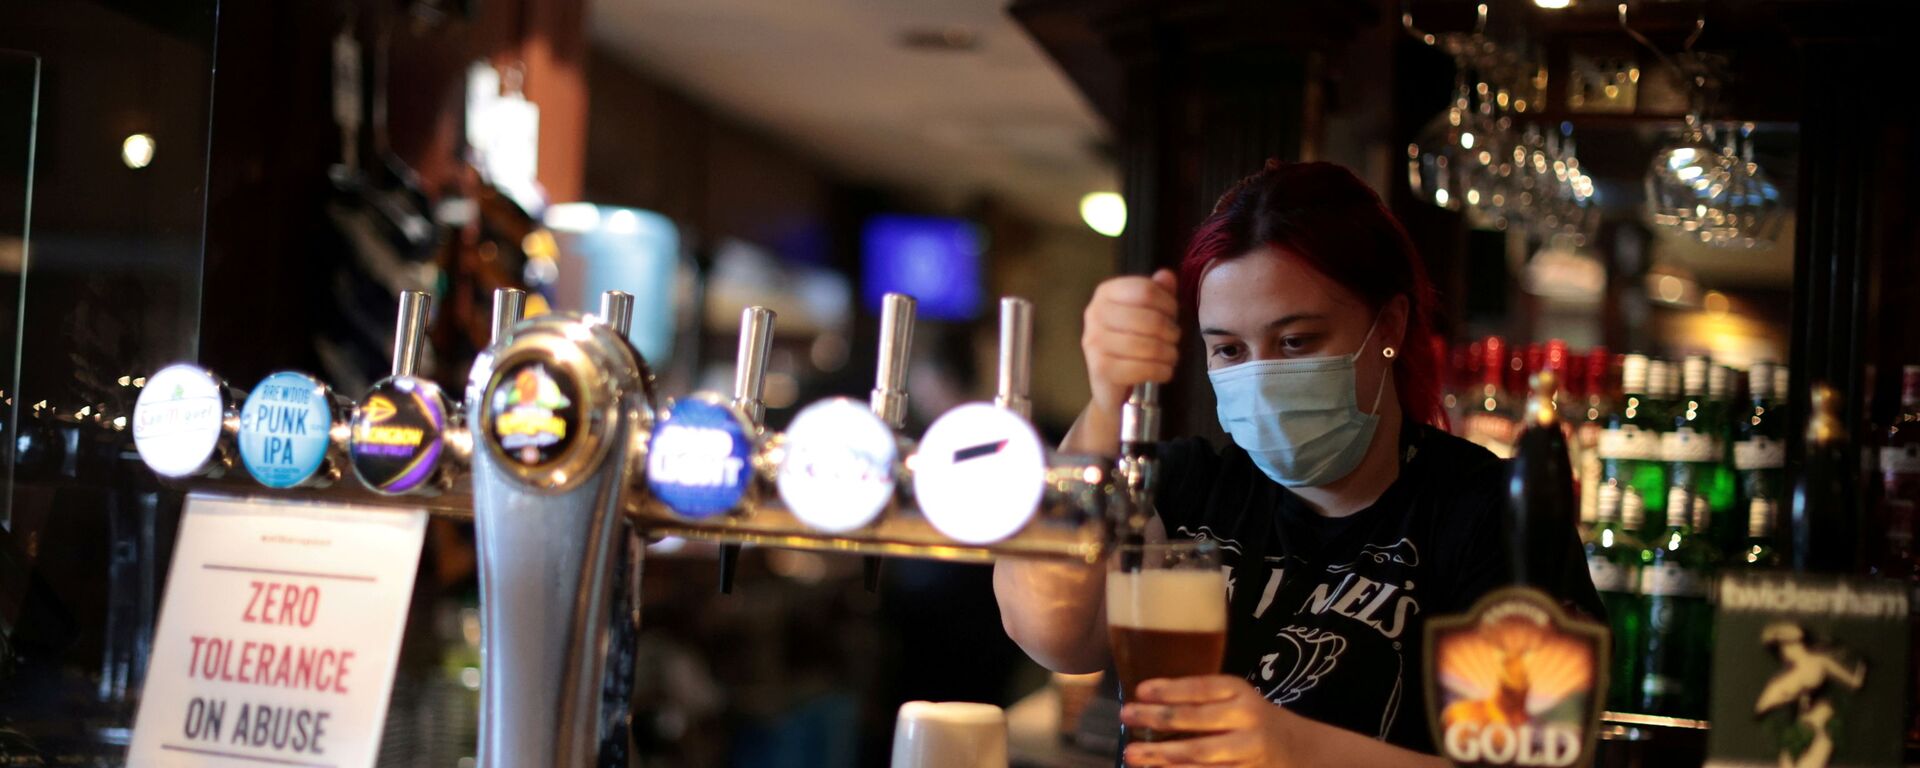 A woman pours a pint at The Fox on the Hill pub which has reopened as coronavirus disease (COVID-19) restrictions continue to be eased, in Denmark Hill, London, Britain, 17 May 2021.  - Sputnik International, 1920, 21.05.2021